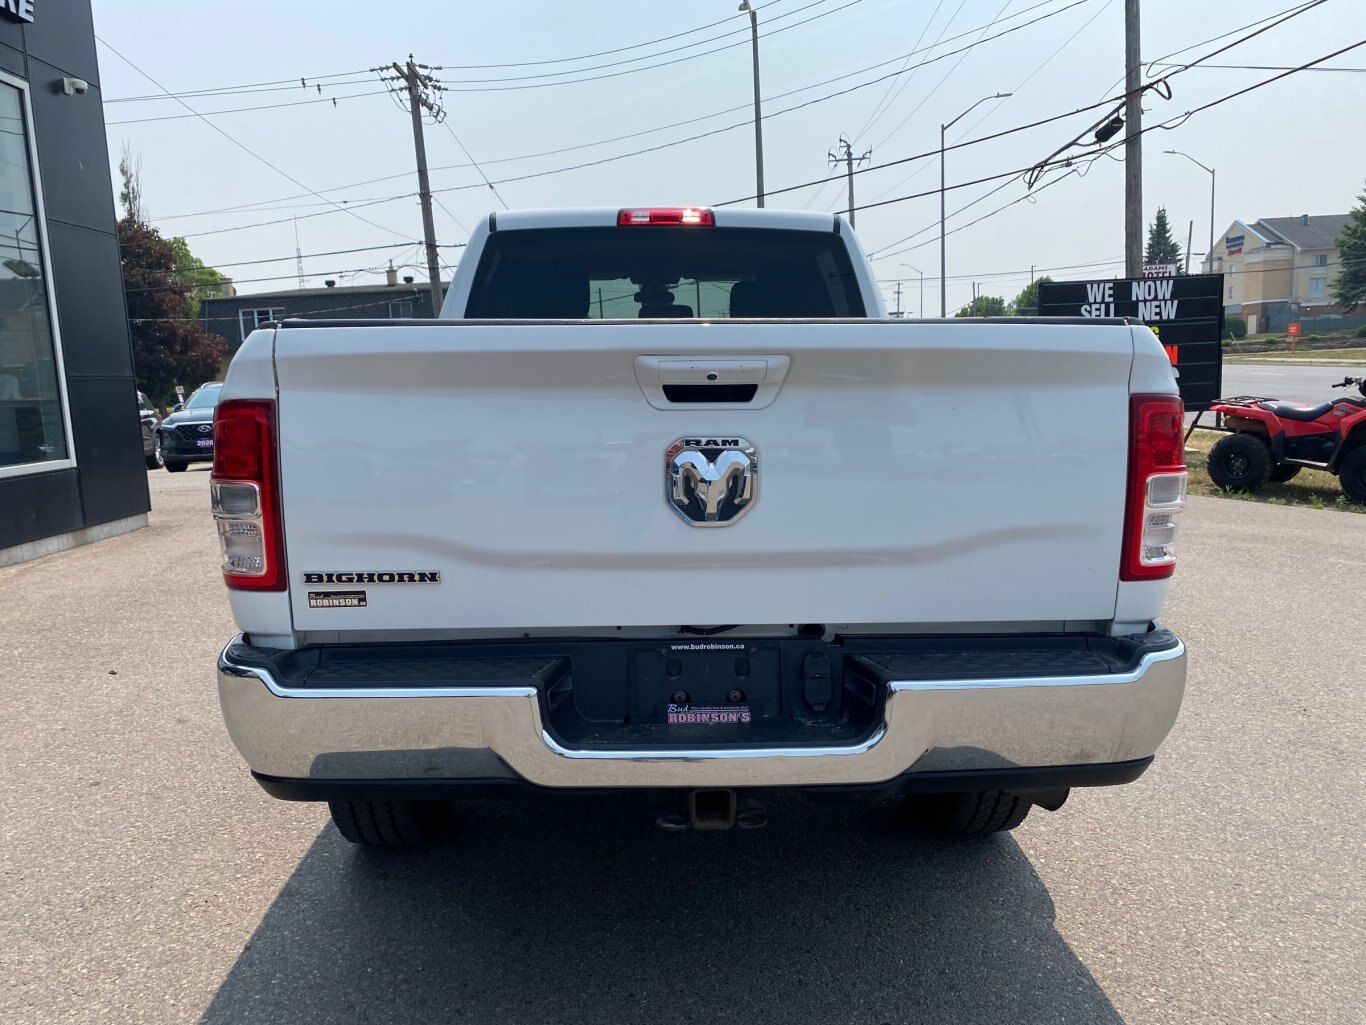 2020 DODGE RAM 2500 BIG HORN 4X4 CREW CAB WITH REAR VIEW CAMERA!! ( PREVIOUS RENTAL )